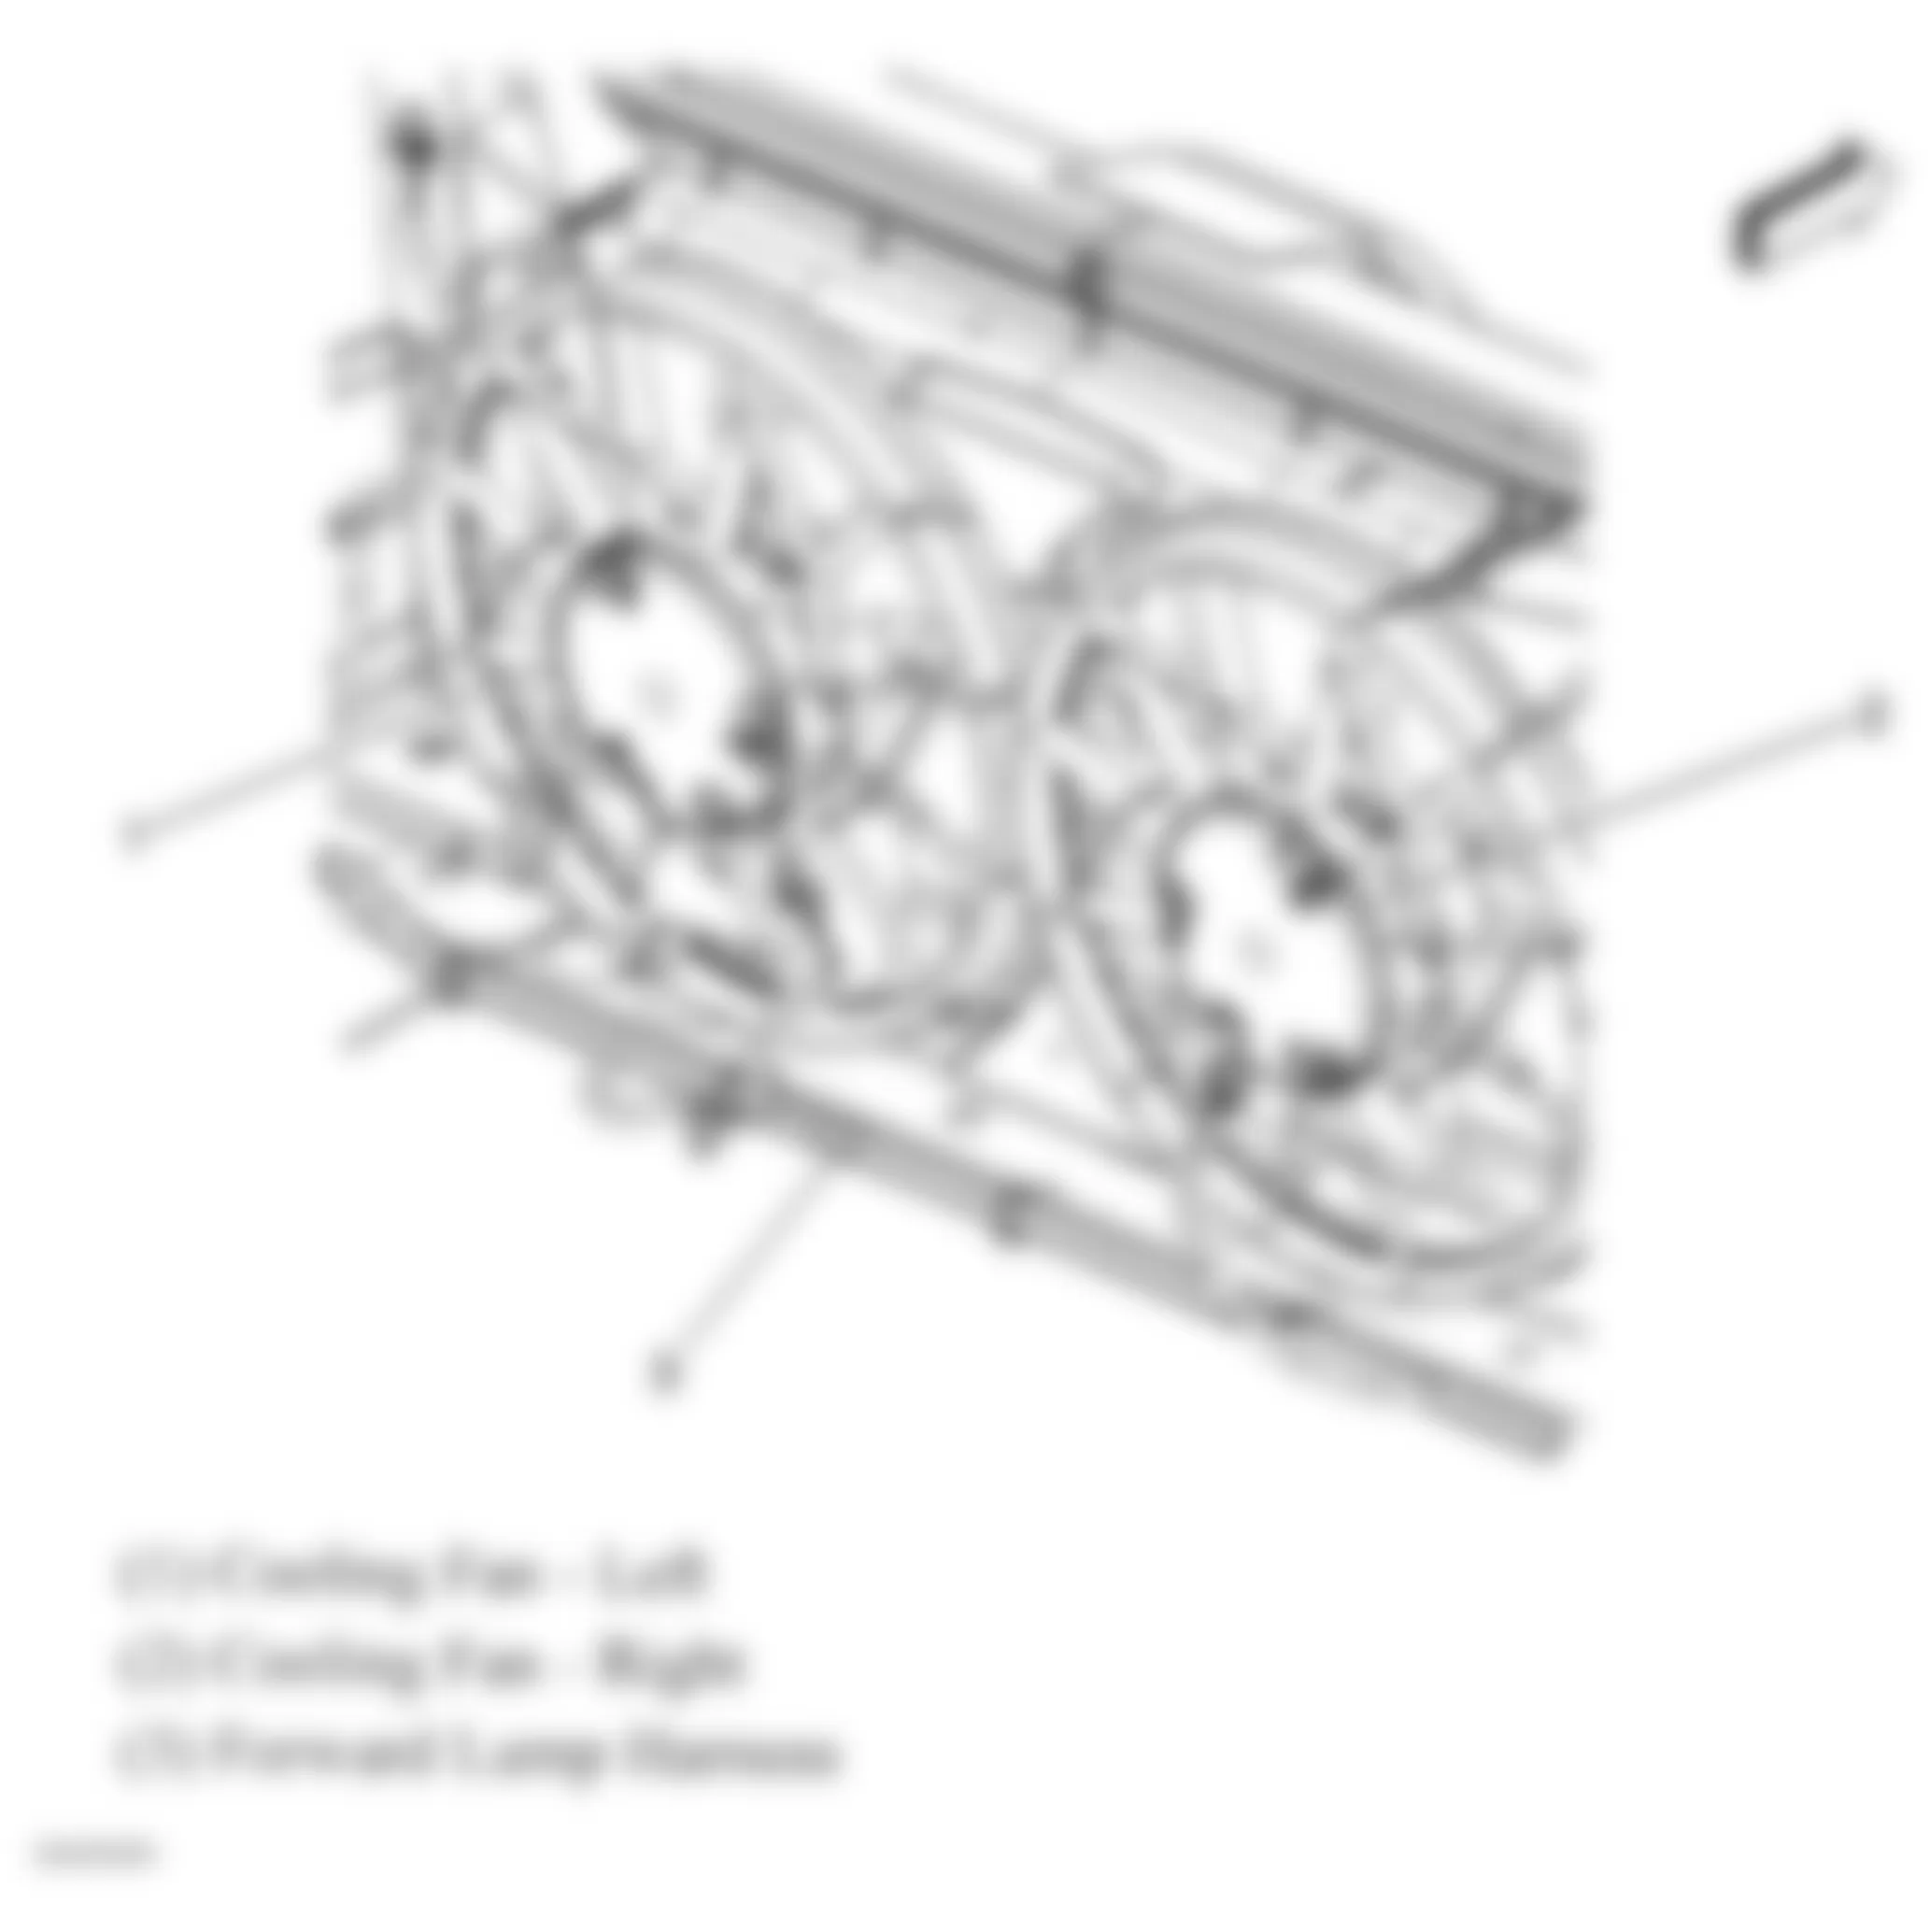 Chevrolet Silverado 3500 HD 2009 - Component Locations -  Engine Cooling Fans (10 Series)